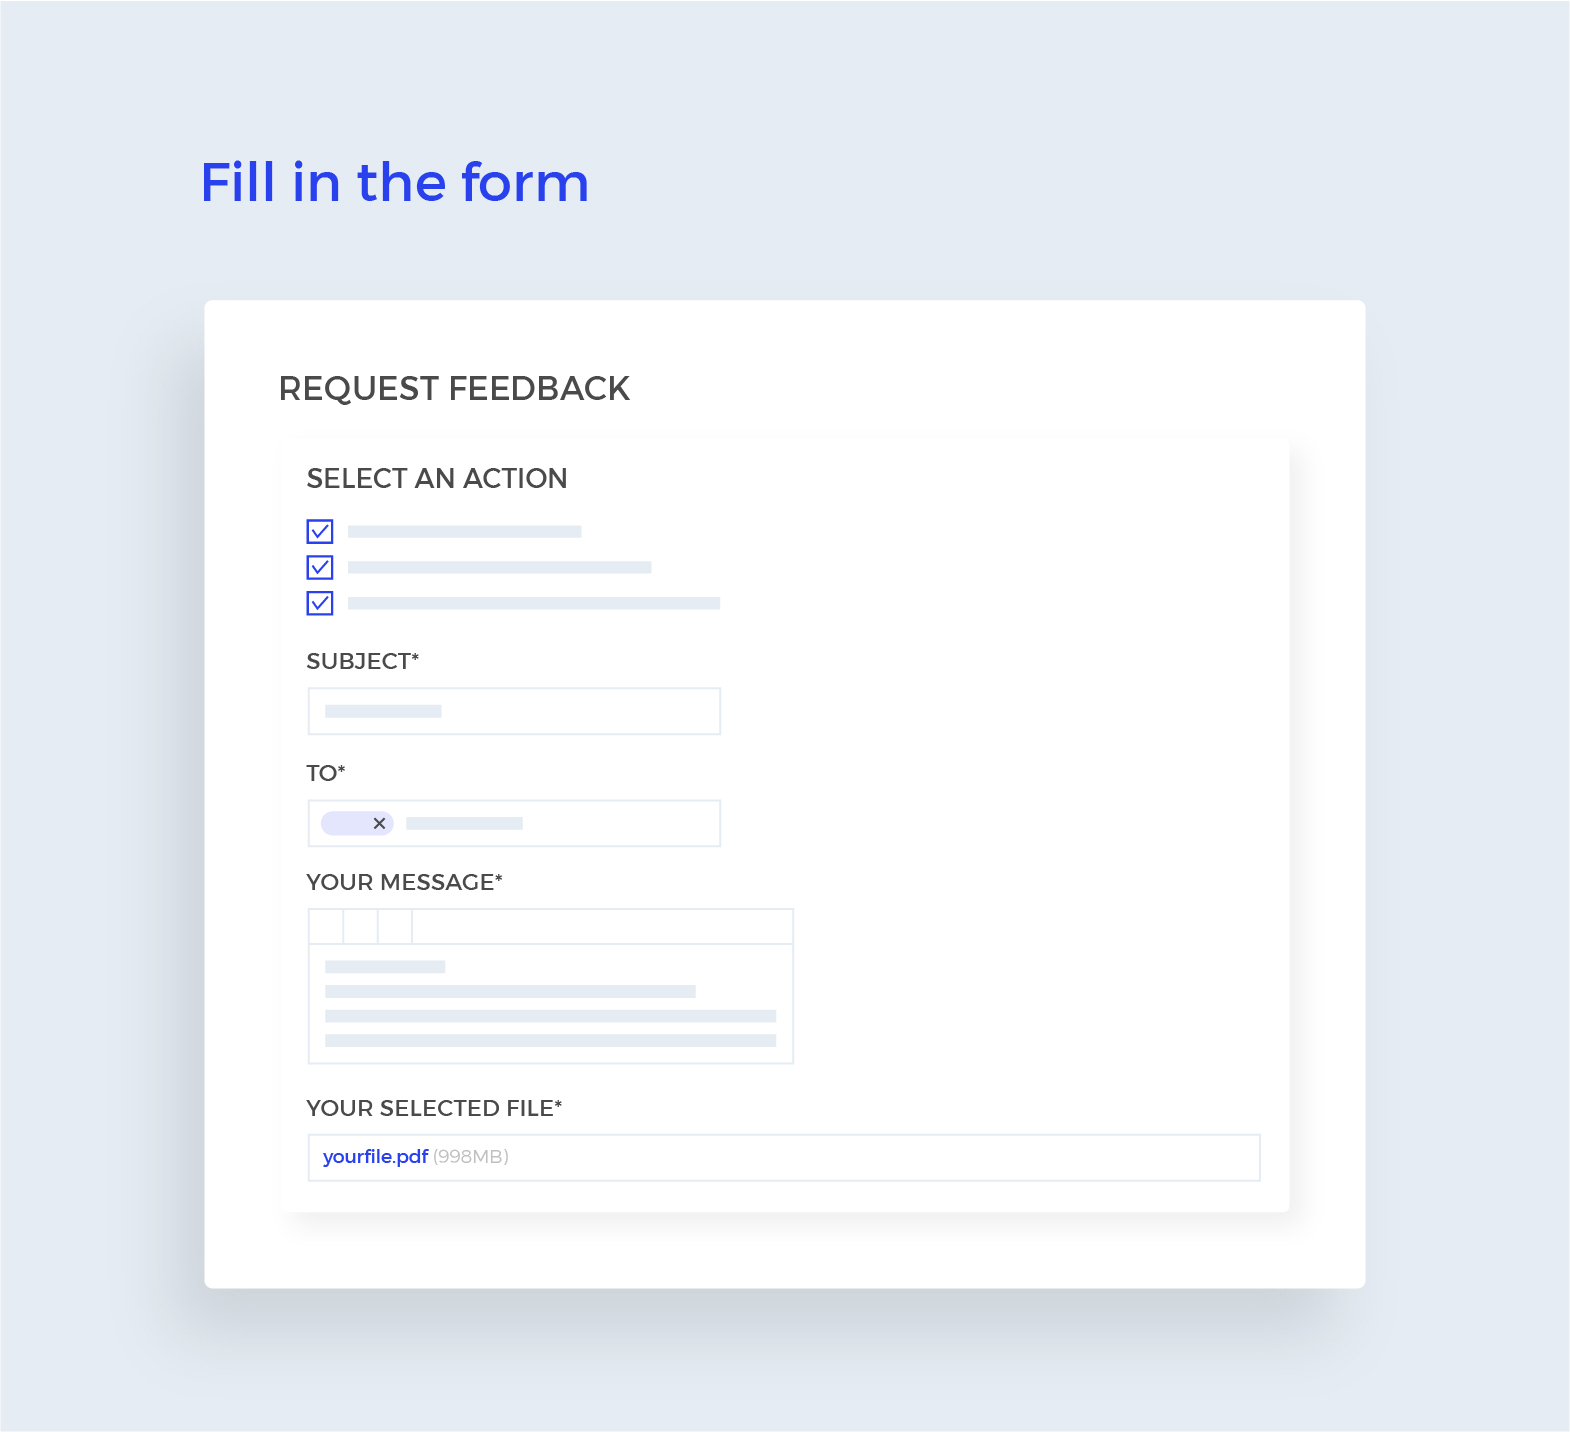 Fill the form